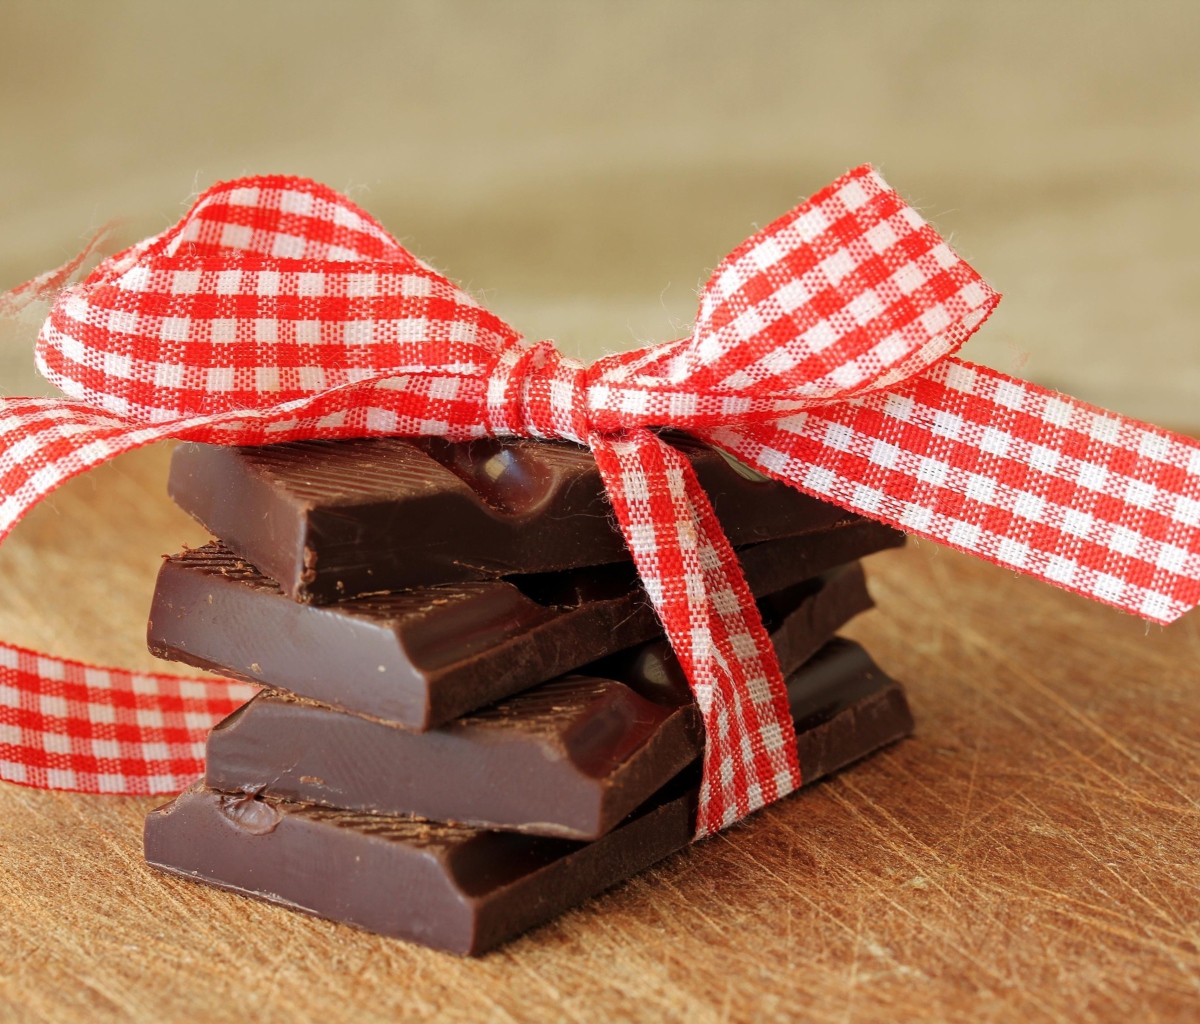 Chocolate And Red Bow wallpaper 1200x1024